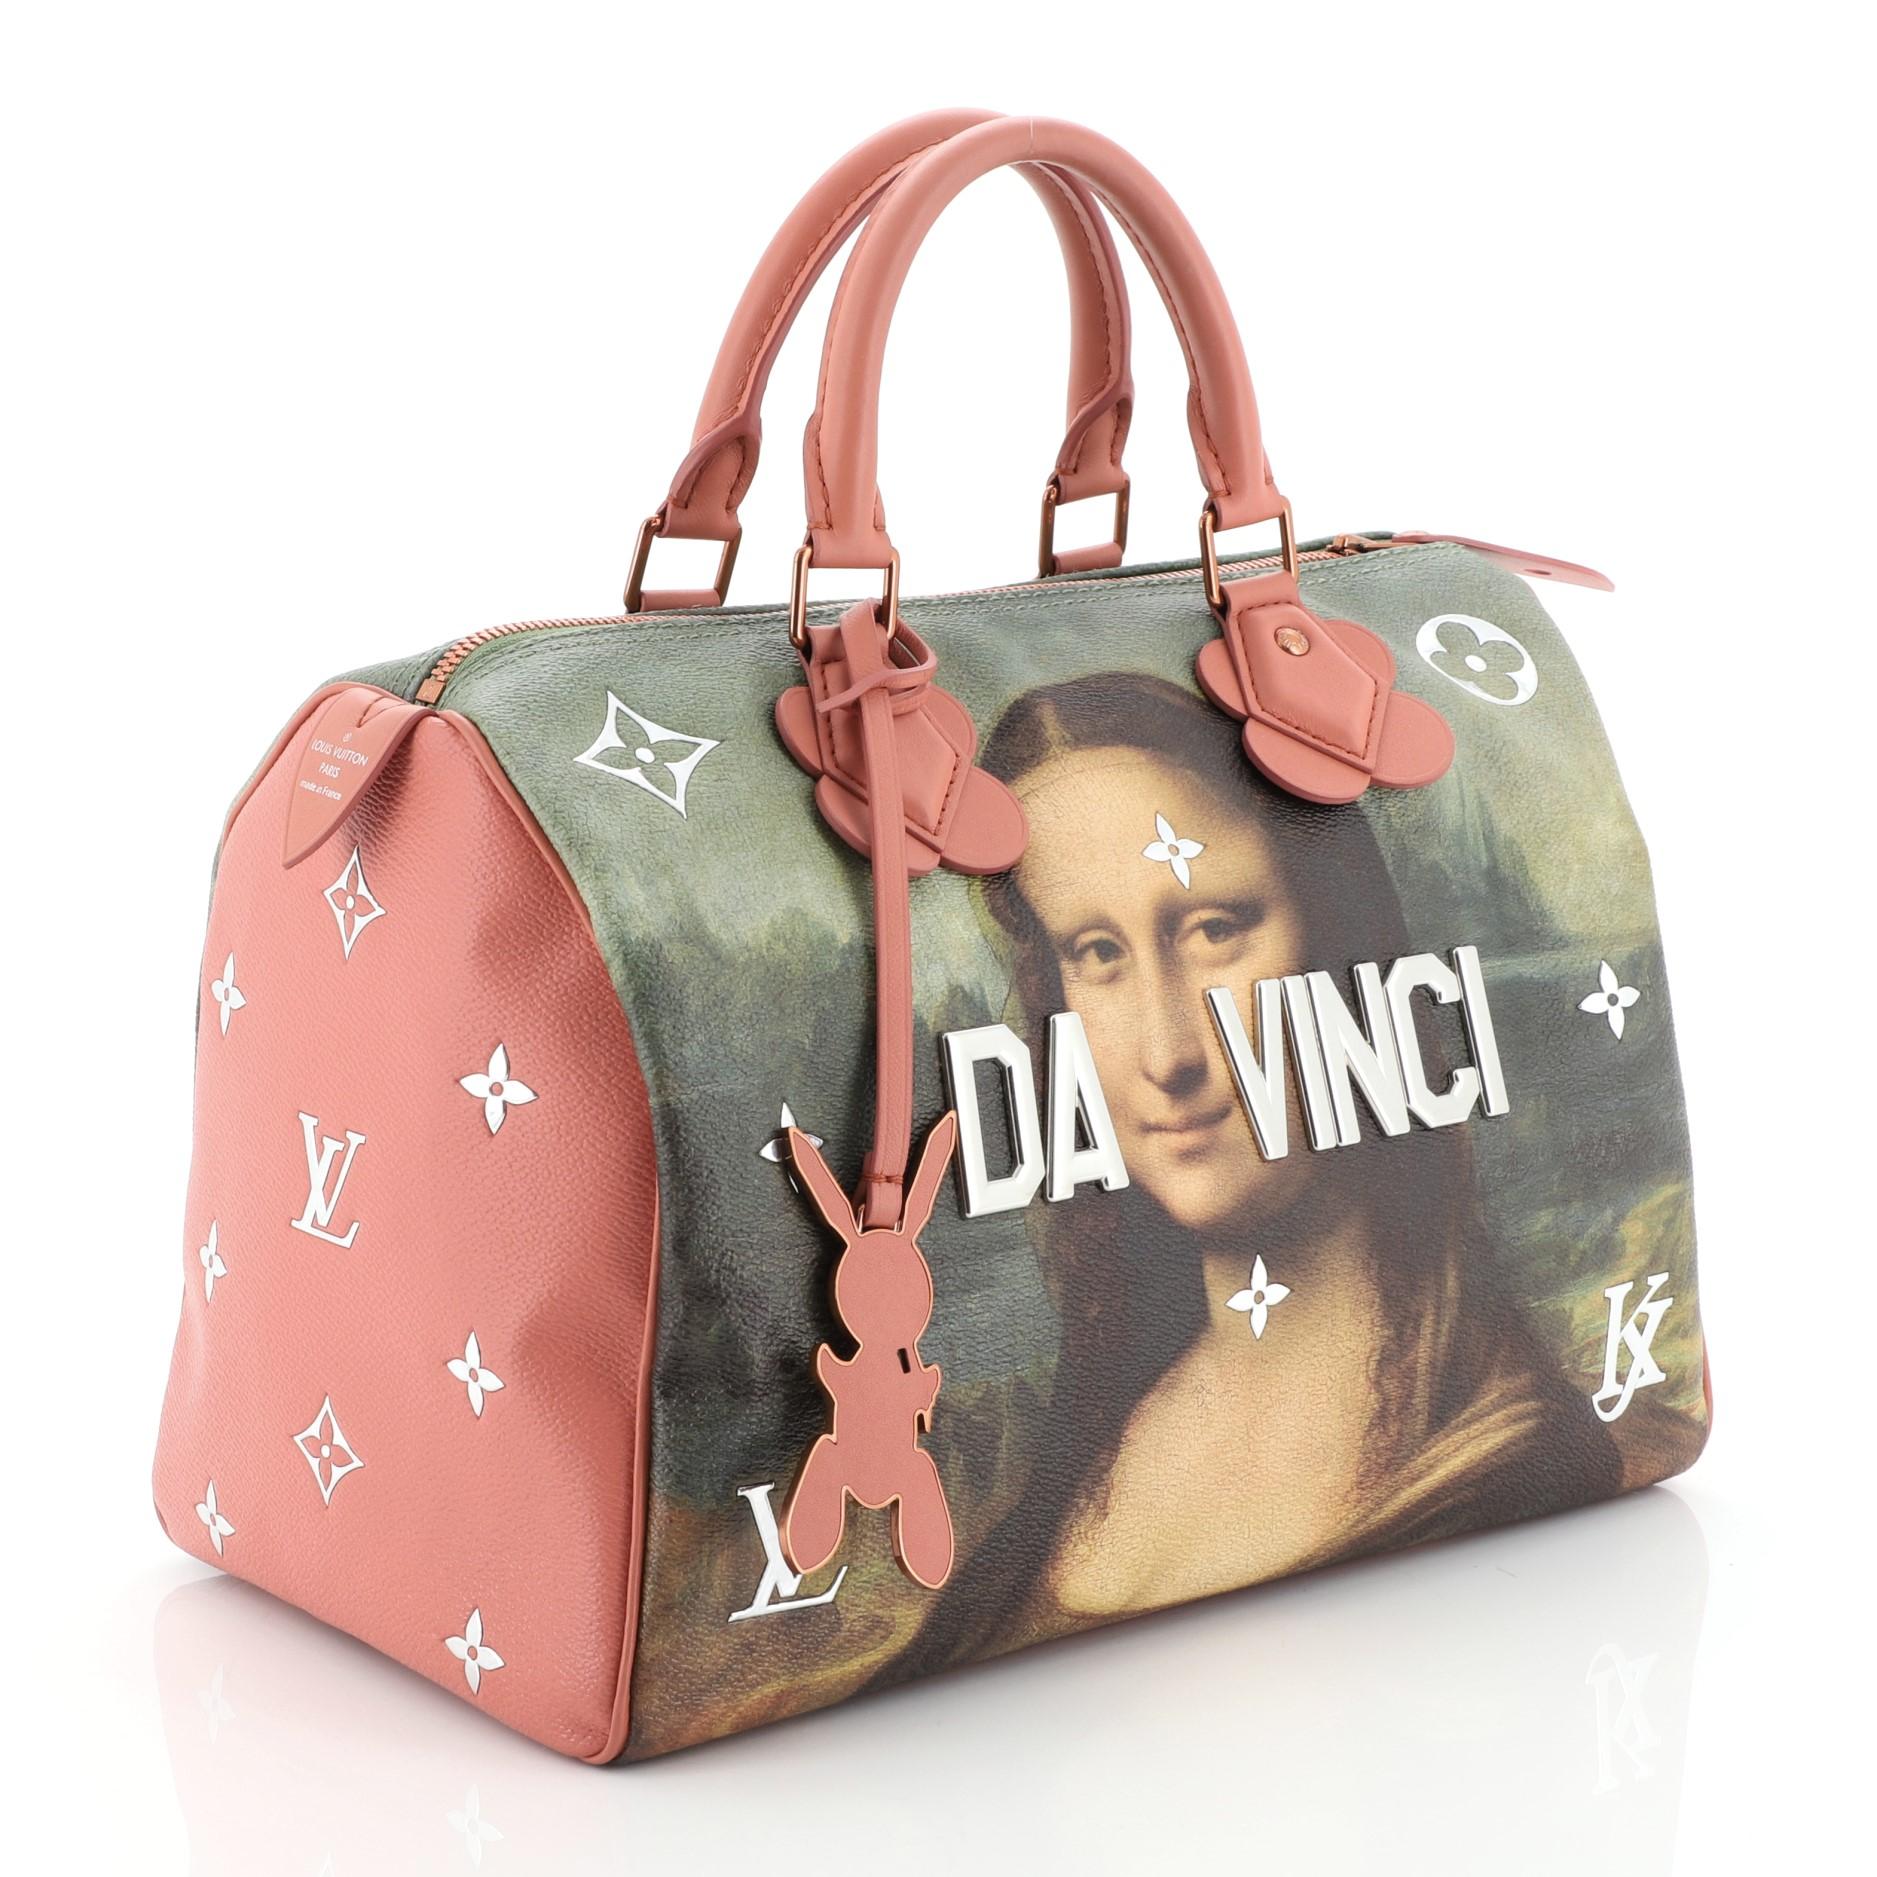 This Louis Vuitton Speedy Handbag Limited Edition Jeff Koons Da Vinci Print Canvas 30, crafted from pink coated canvas exterior with Da Vinci print, features dual rolled leather handles, reflective metallic letters and trimmings, and gold-tone